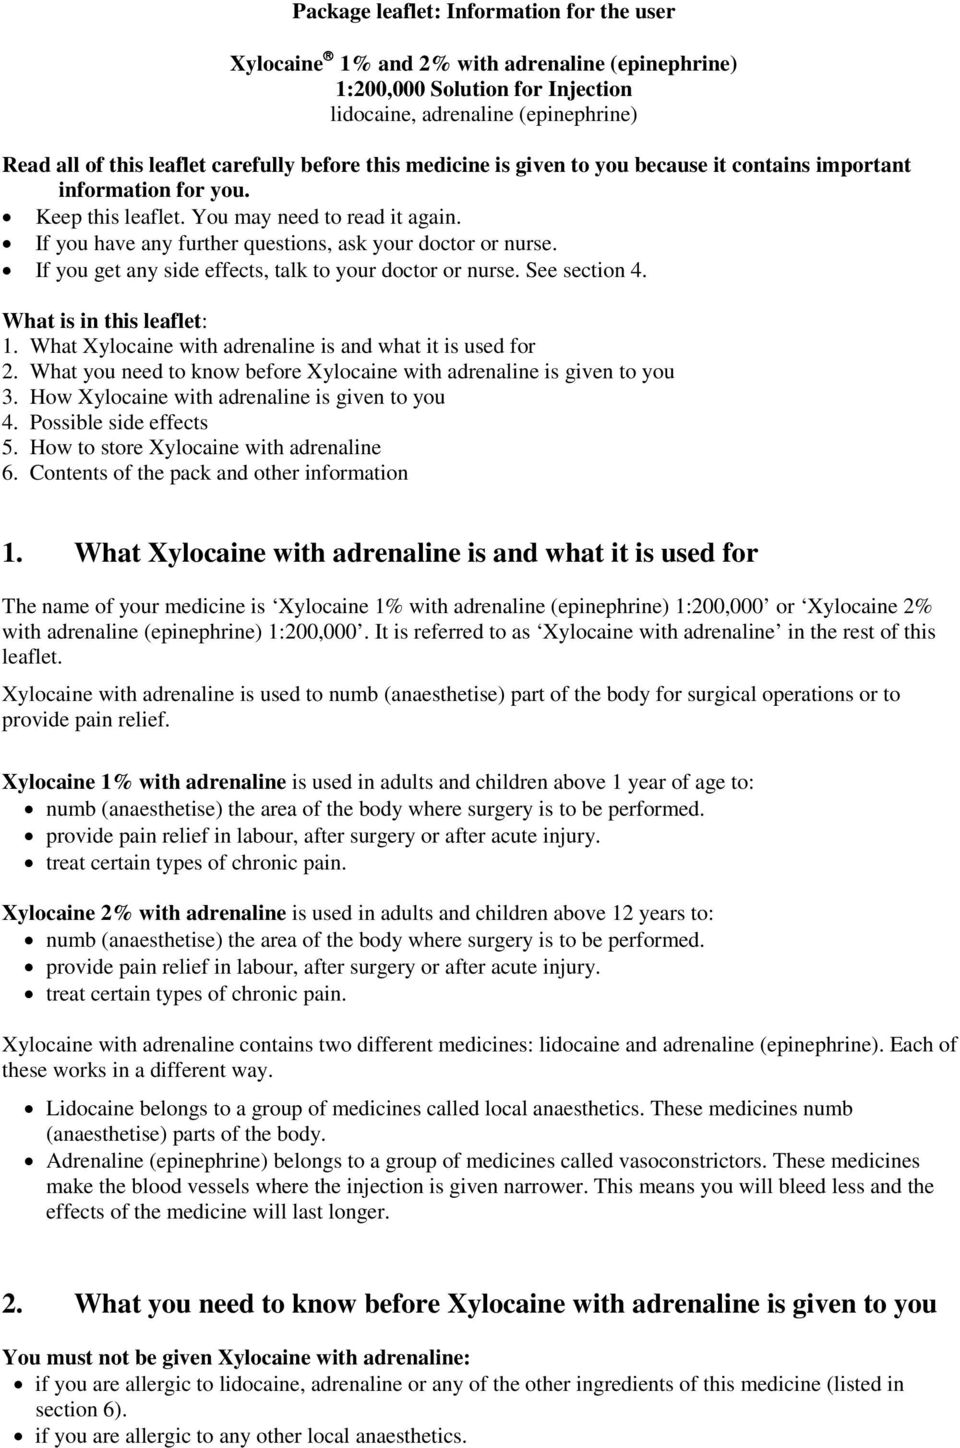 If you get any side effects, talk to your doctor or nurse. See section 4. What is in this leaflet: 1. What Xylocaine with adrenaline is and what it is used for 2.